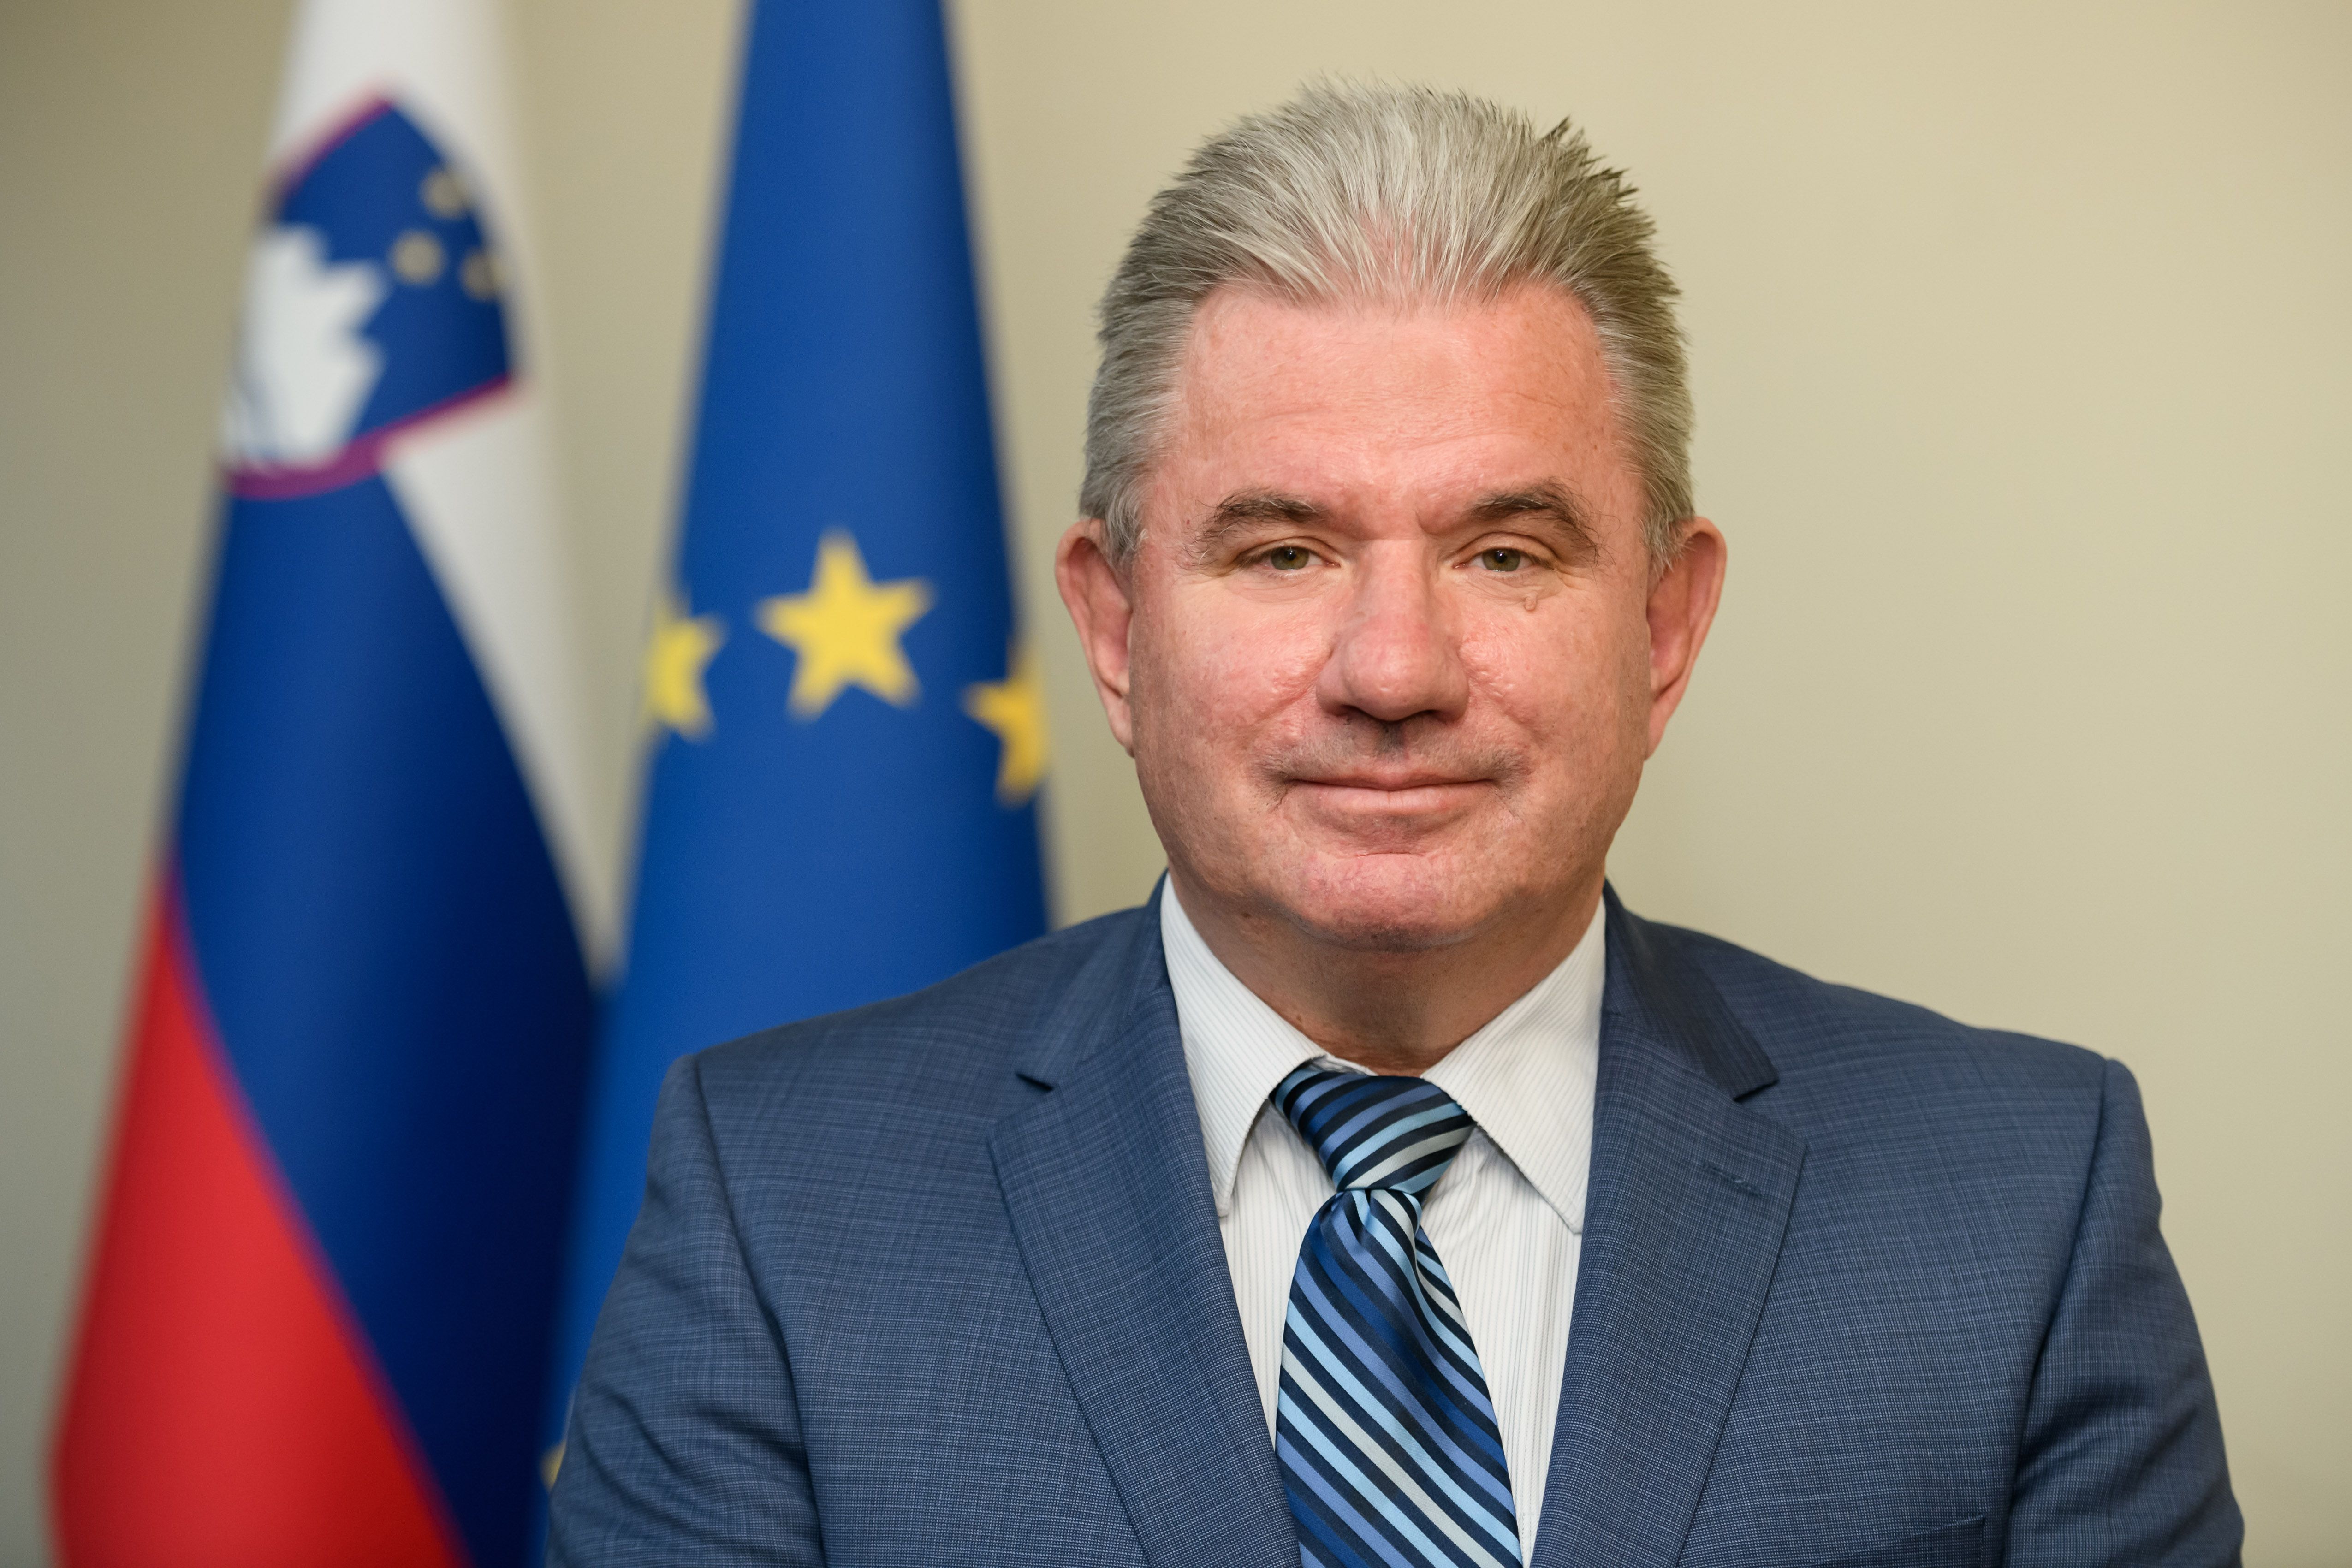 mag. Andrej Vizjak, Minister of the Environment and Spatial Planning ...